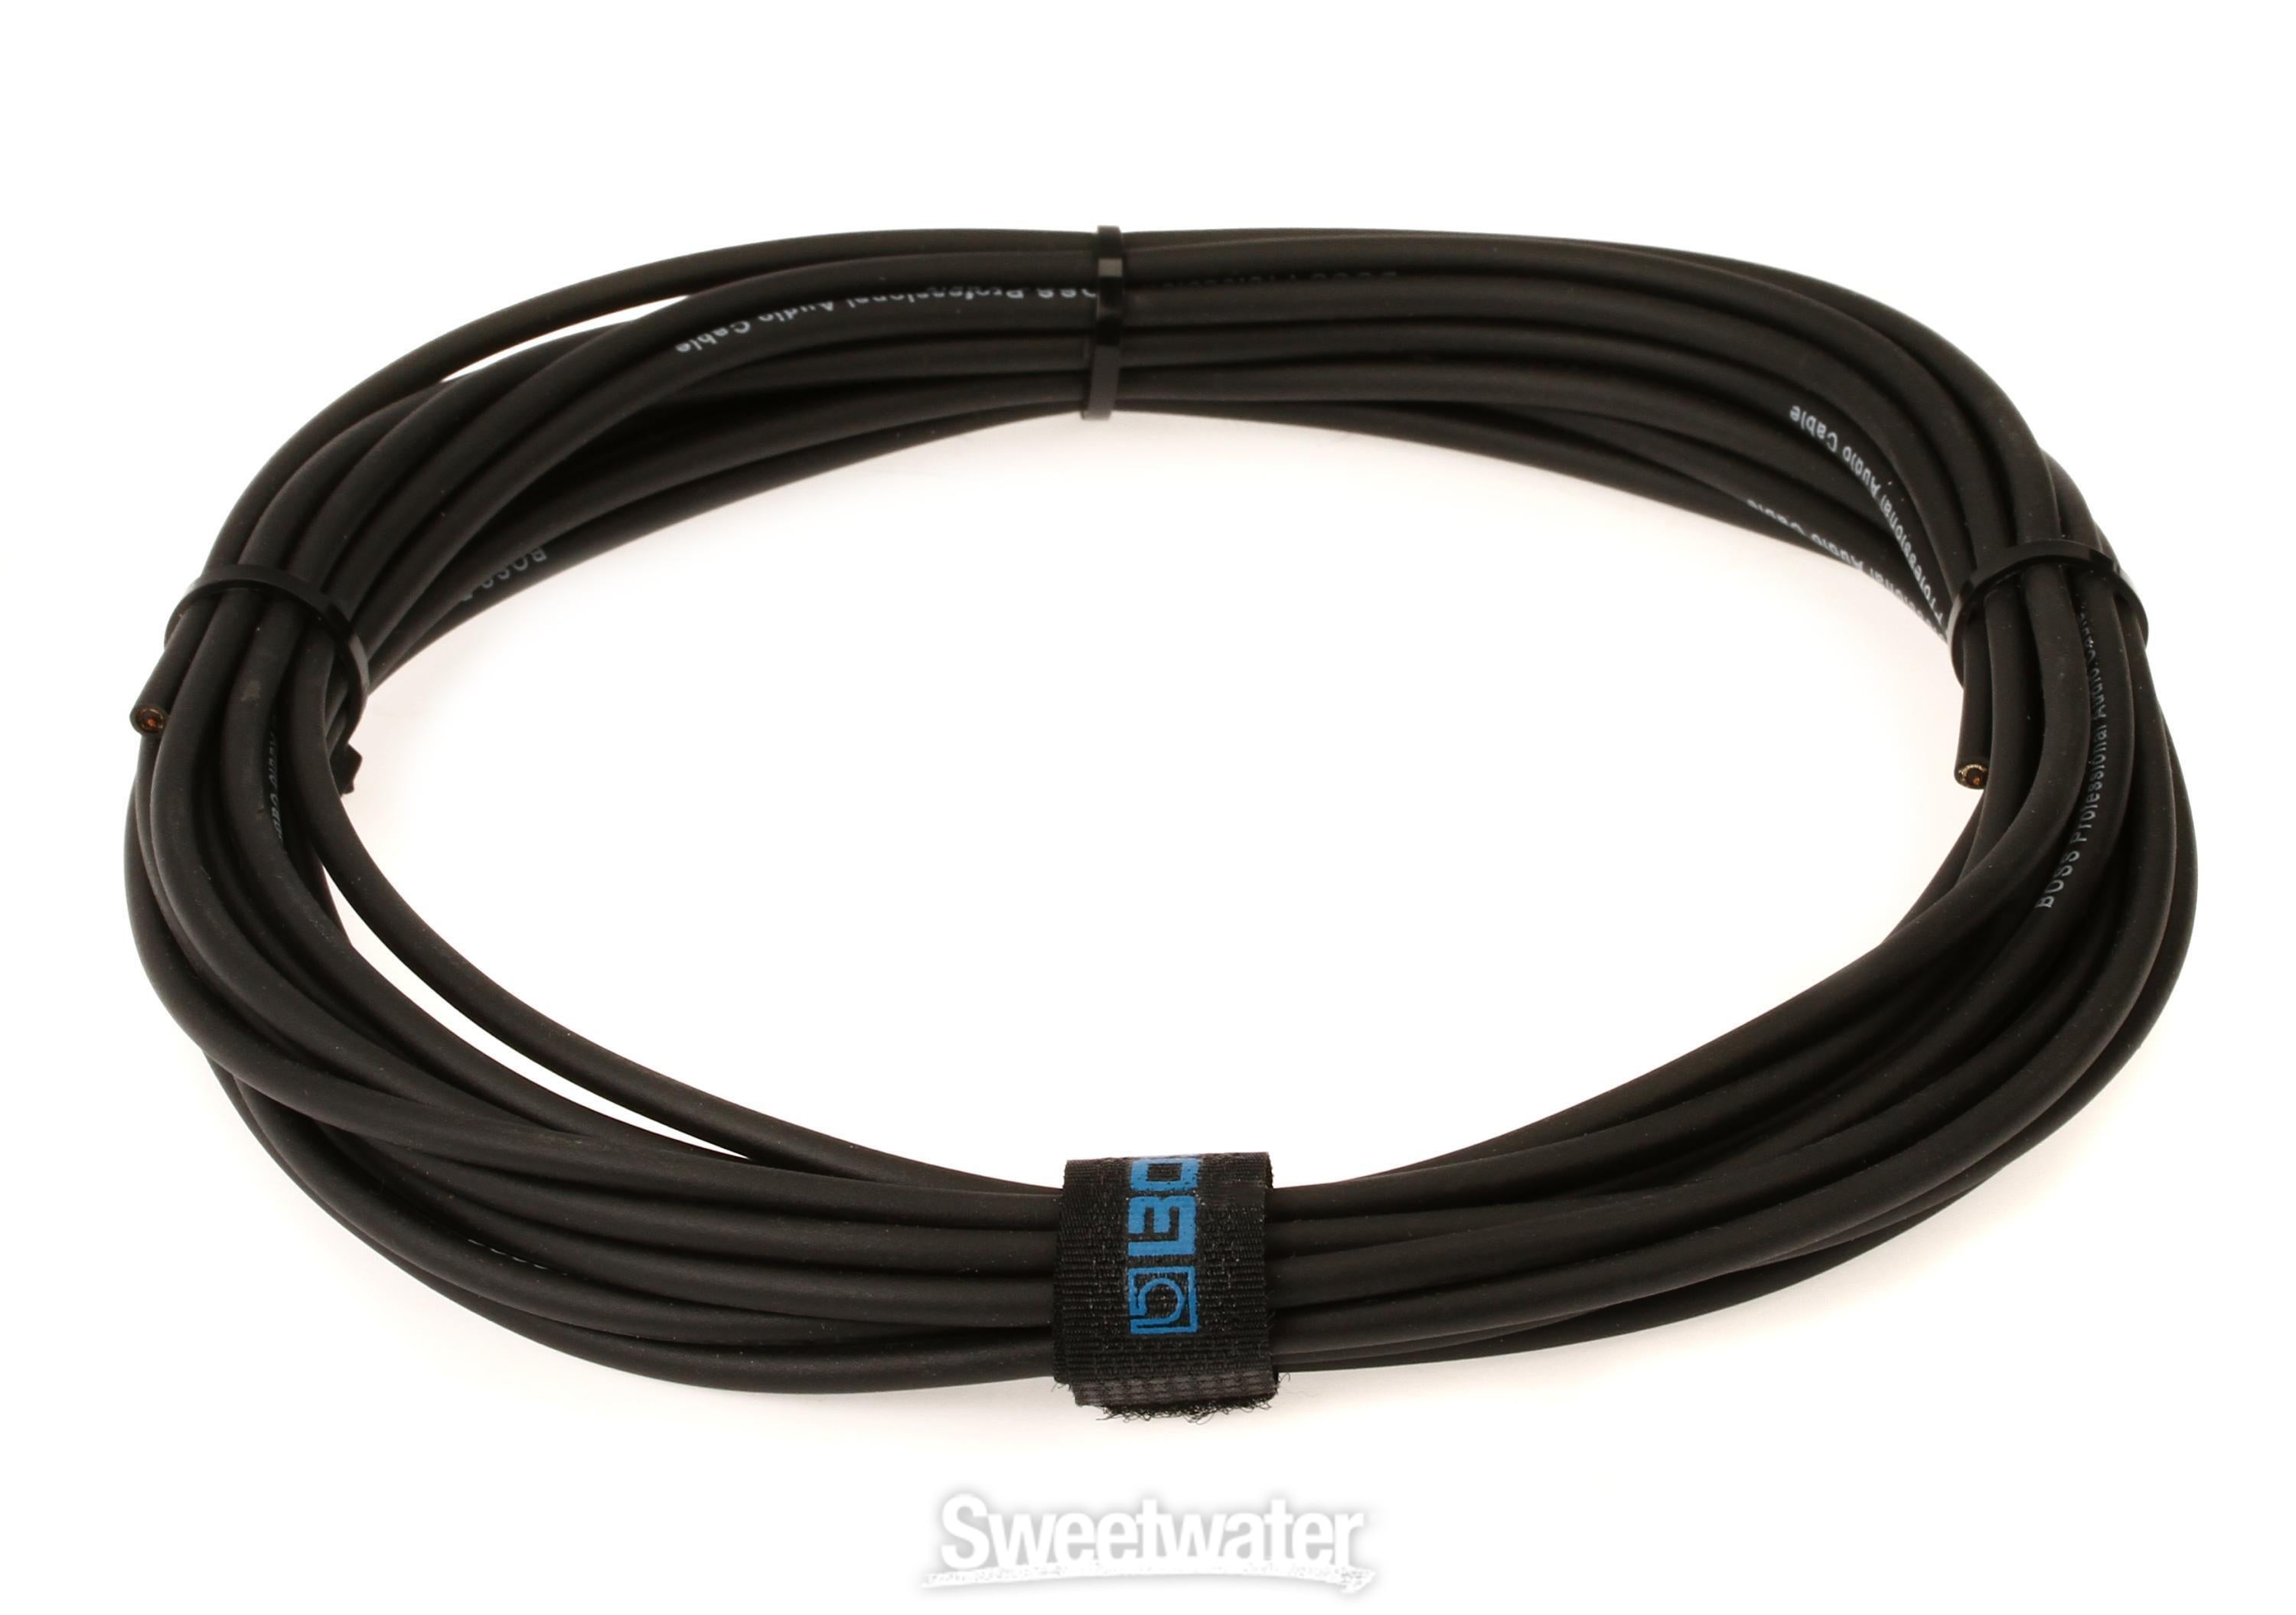 Boss BCK-24 Pedalboard Cable Kit - 24 foot - 24 Connectors